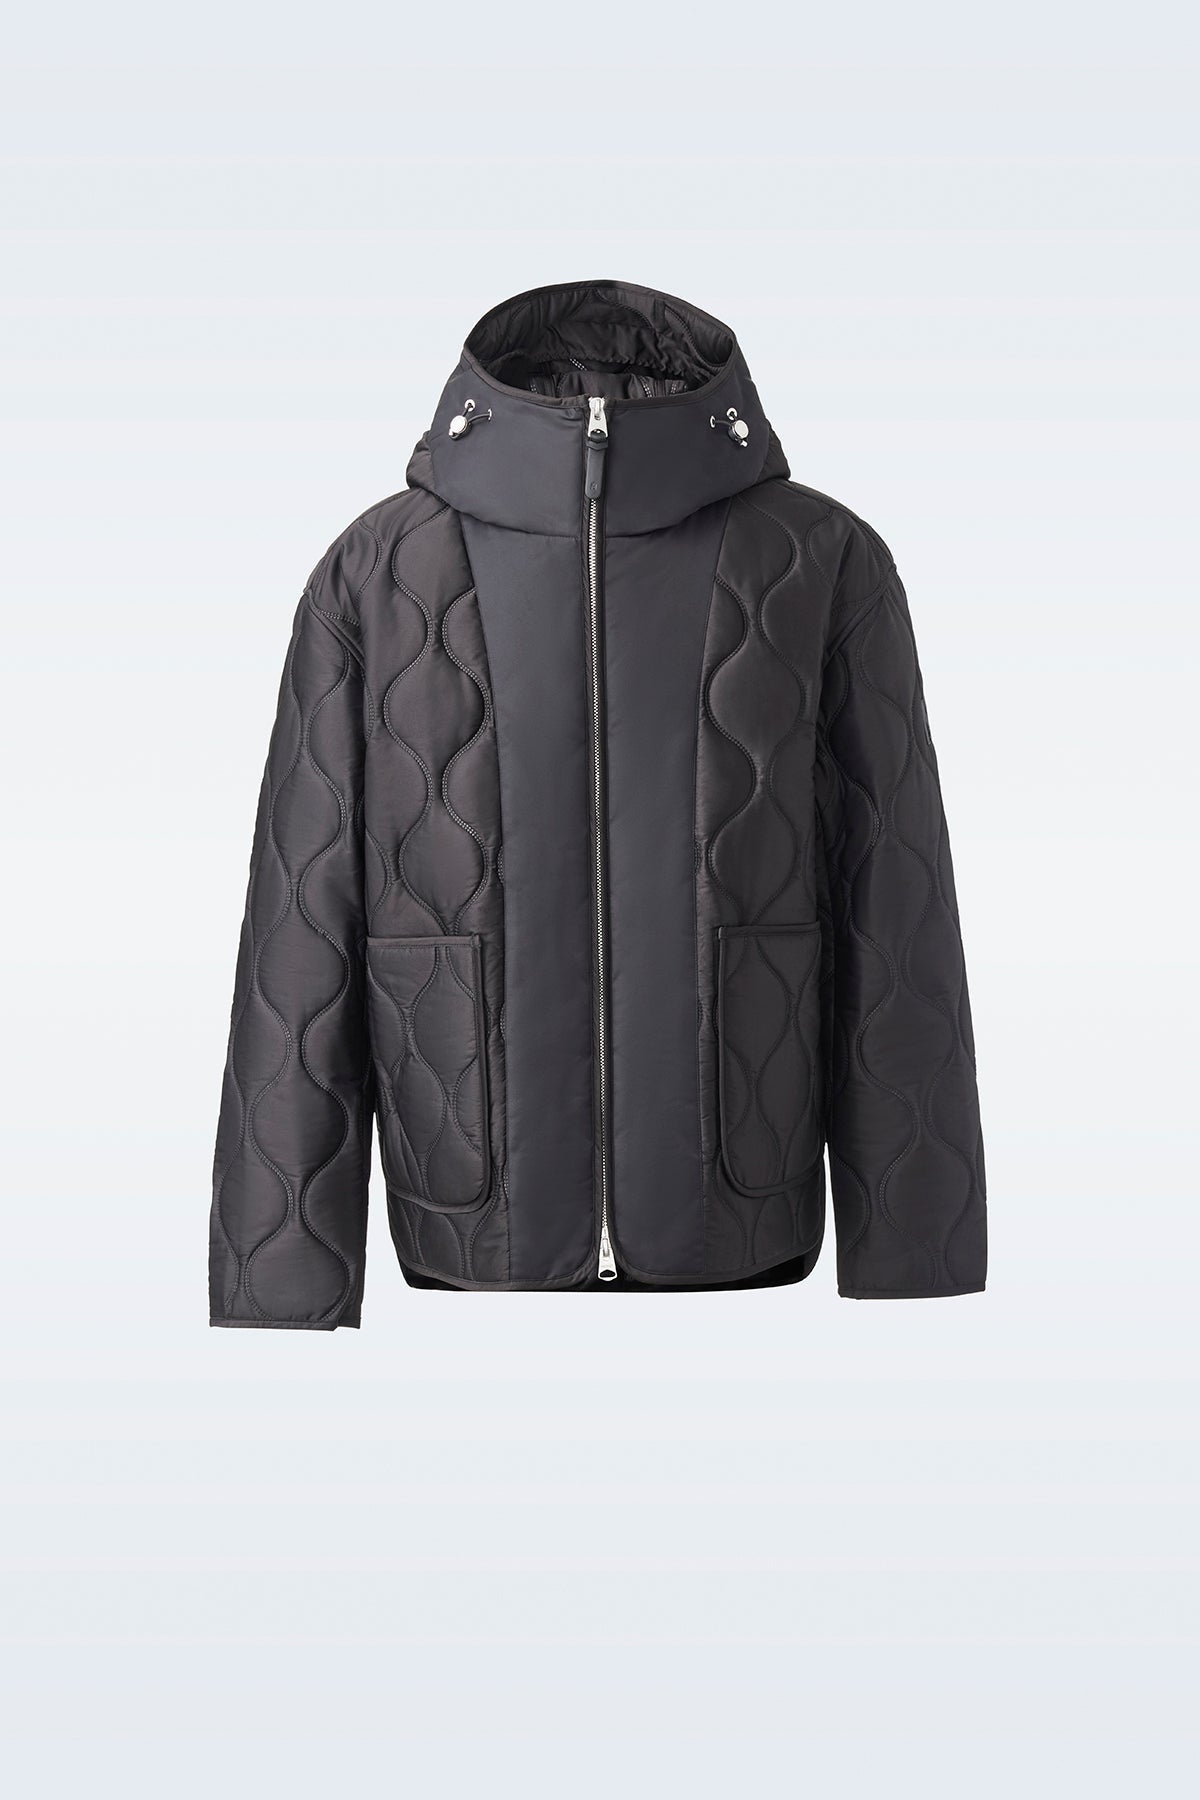 Louis Vuitton Reversible Quilted Hooded Jacket Vanilla. Size 36